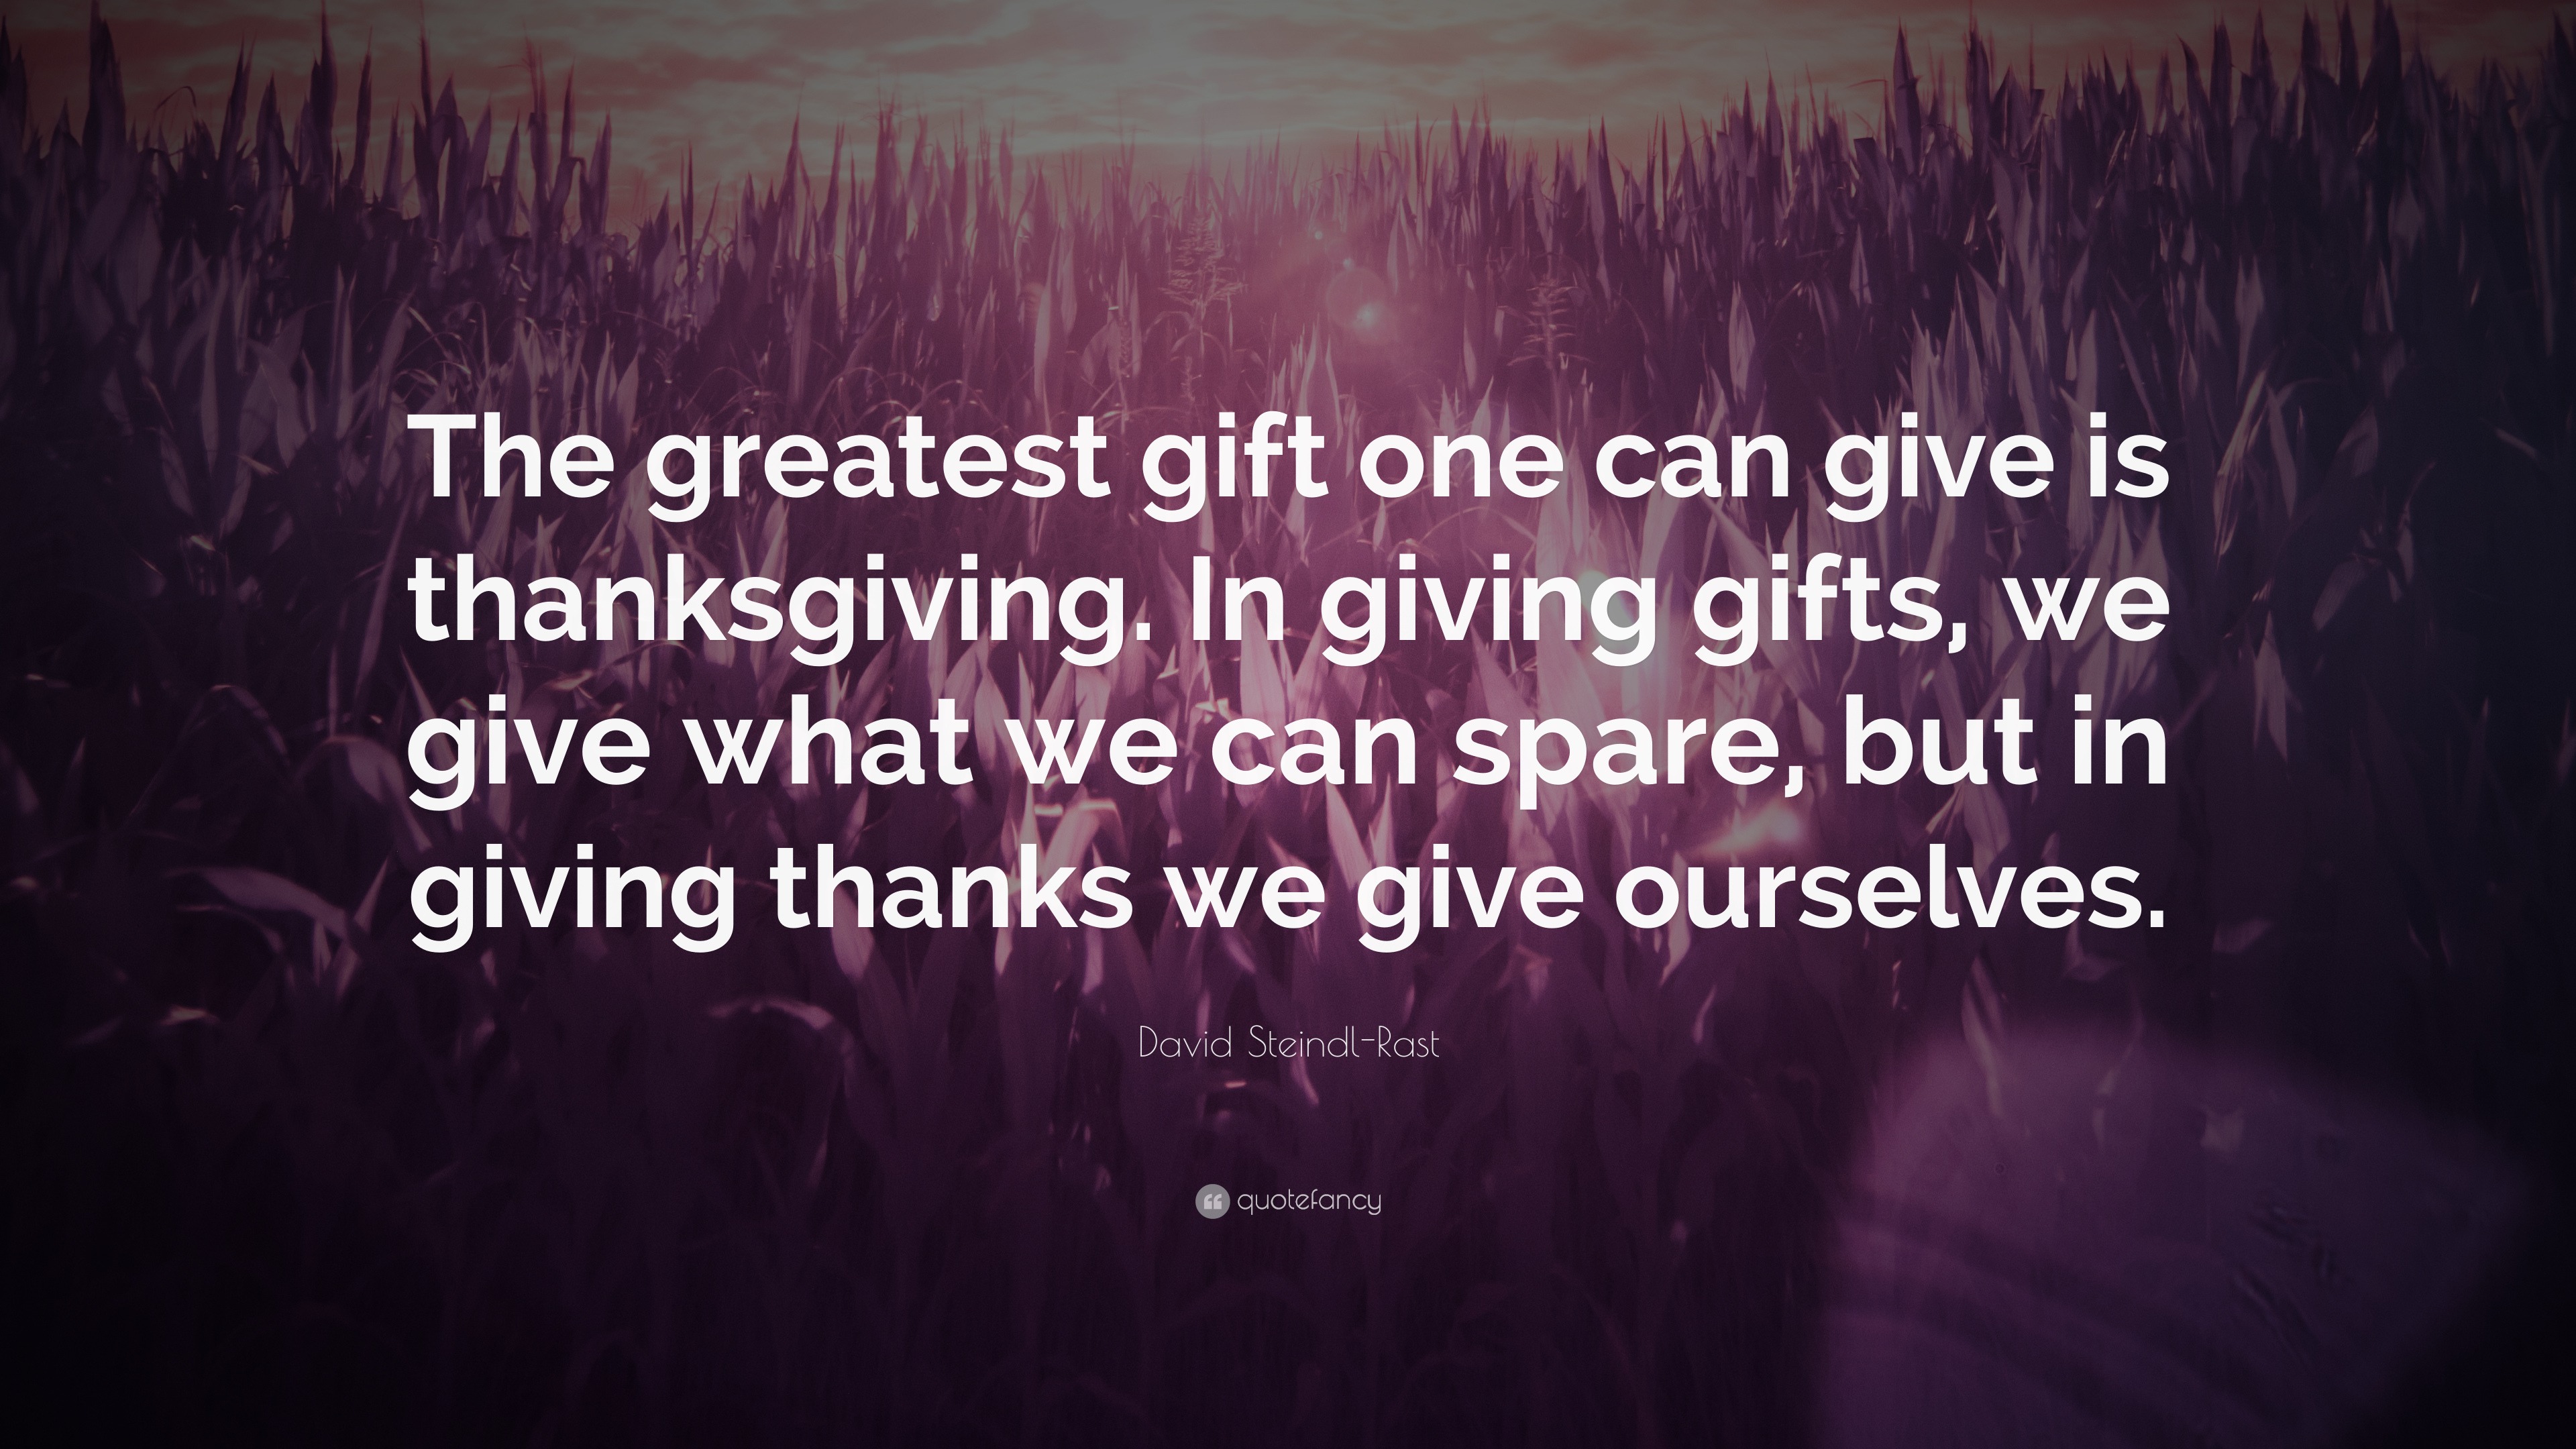 David Steindl Rast Quote “The greatest t one can give is thanksgiving